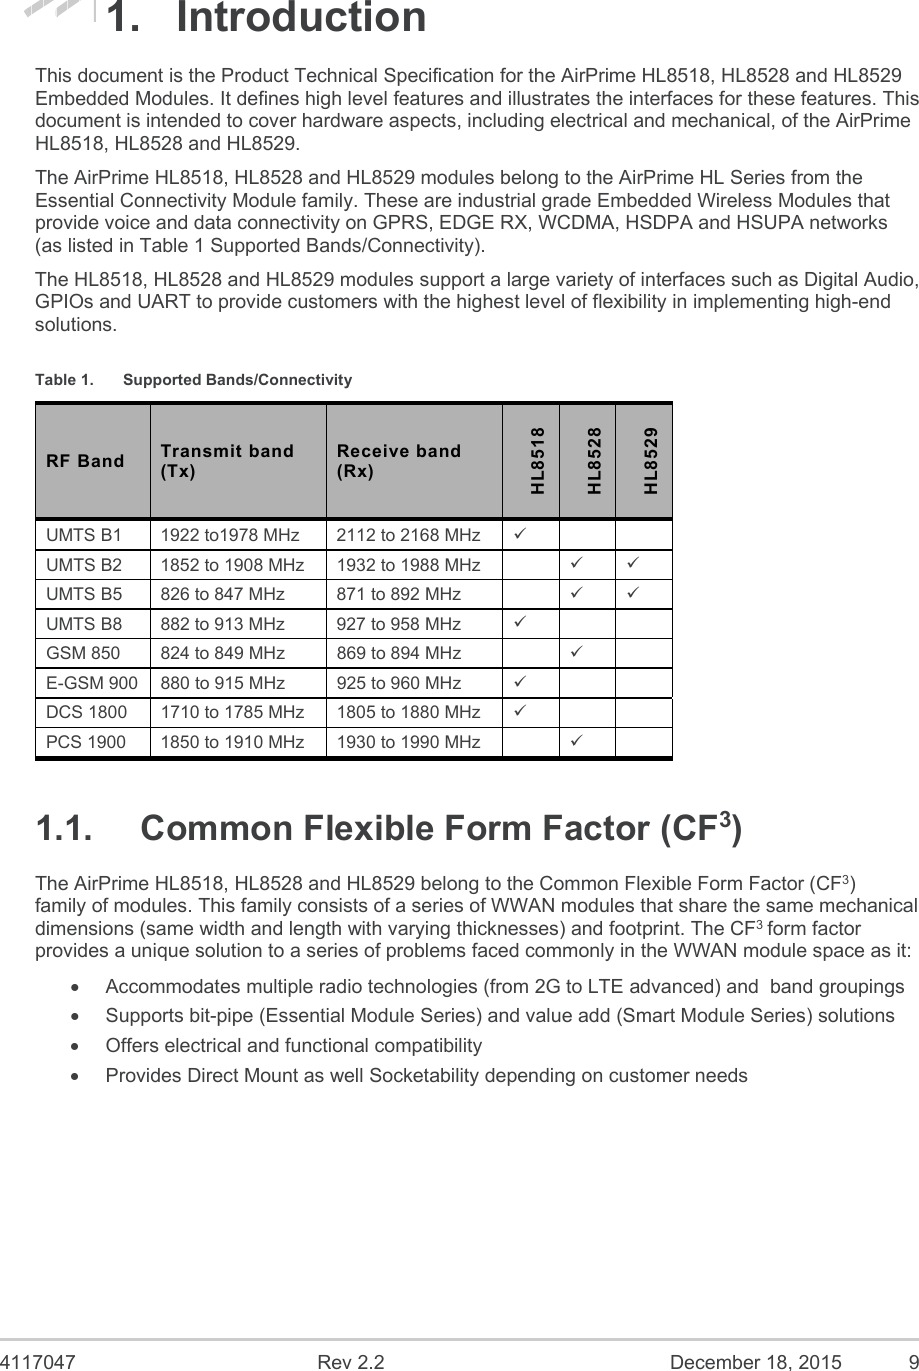  4117047  Rev 2.2  December 18, 2015  9 1.  Introduction This document is the Product Technical Specification for the AirPrime HL8518, HL8528 and HL8529 Embedded Modules. It defines high level features and illustrates the interfaces for these features. This document is intended to cover hardware aspects, including electrical and mechanical, of the AirPrime HL8518, HL8528 and HL8529. The AirPrime HL8518, HL8528 and HL8529 modules belong to the AirPrime HL Series from the Essential Connectivity Module family. These are industrial grade Embedded Wireless Modules that provide voice and data connectivity on GPRS, EDGE RX, WCDMA, HSDPA and HSUPA networks (as listed in Table 1 Supported Bands/Connectivity). The HL8518, HL8528 and HL8529 modules support a large variety of interfaces such as Digital Audio, GPIOs and UART to provide customers with the highest level of flexibility in implementing high-end solutions. Table 1.  Supported Bands/Connectivity RF Band  Transmit band (Tx) Receive band (Rx) HL8518 HL8528 HL8529 UMTS B1  1922 to1978 MHz  2112 to 2168 MHz     UMTS B2  1852 to 1908 MHz  1932 to 1988 MHz      UMTS B5  826 to 847 MHz  871 to 892 MHz      UMTS B8  882 to 913 MHz  927 to 958 MHz     GSM 850  824 to 849 MHz  869 to 894 MHz      E-GSM 900  880 to 915 MHz  925 to 960 MHz     DCS 1800  1710 to 1785 MHz  1805 to 1880 MHz     PCS 1900  1850 to 1910 MHz  1930 to 1990 MHz      1.1.  Common Flexible Form Factor (CF3) The AirPrime HL8518, HL8528 and HL8529 belong to the Common Flexible Form Factor (CF3) family of modules. This family consists of a series of WWAN modules that share the same mechanical dimensions (same width and length with varying thicknesses) and footprint. The CF3 form factor provides a unique solution to a series of problems faced commonly in the WWAN module space as it:   Accommodates multiple radio technologies (from 2G to LTE advanced) and  band groupings   Supports bit-pipe (Essential Module Series) and value add (Smart Module Series) solutions   Offers electrical and functional compatibility    Provides Direct Mount as well Socketability depending on customer needs 